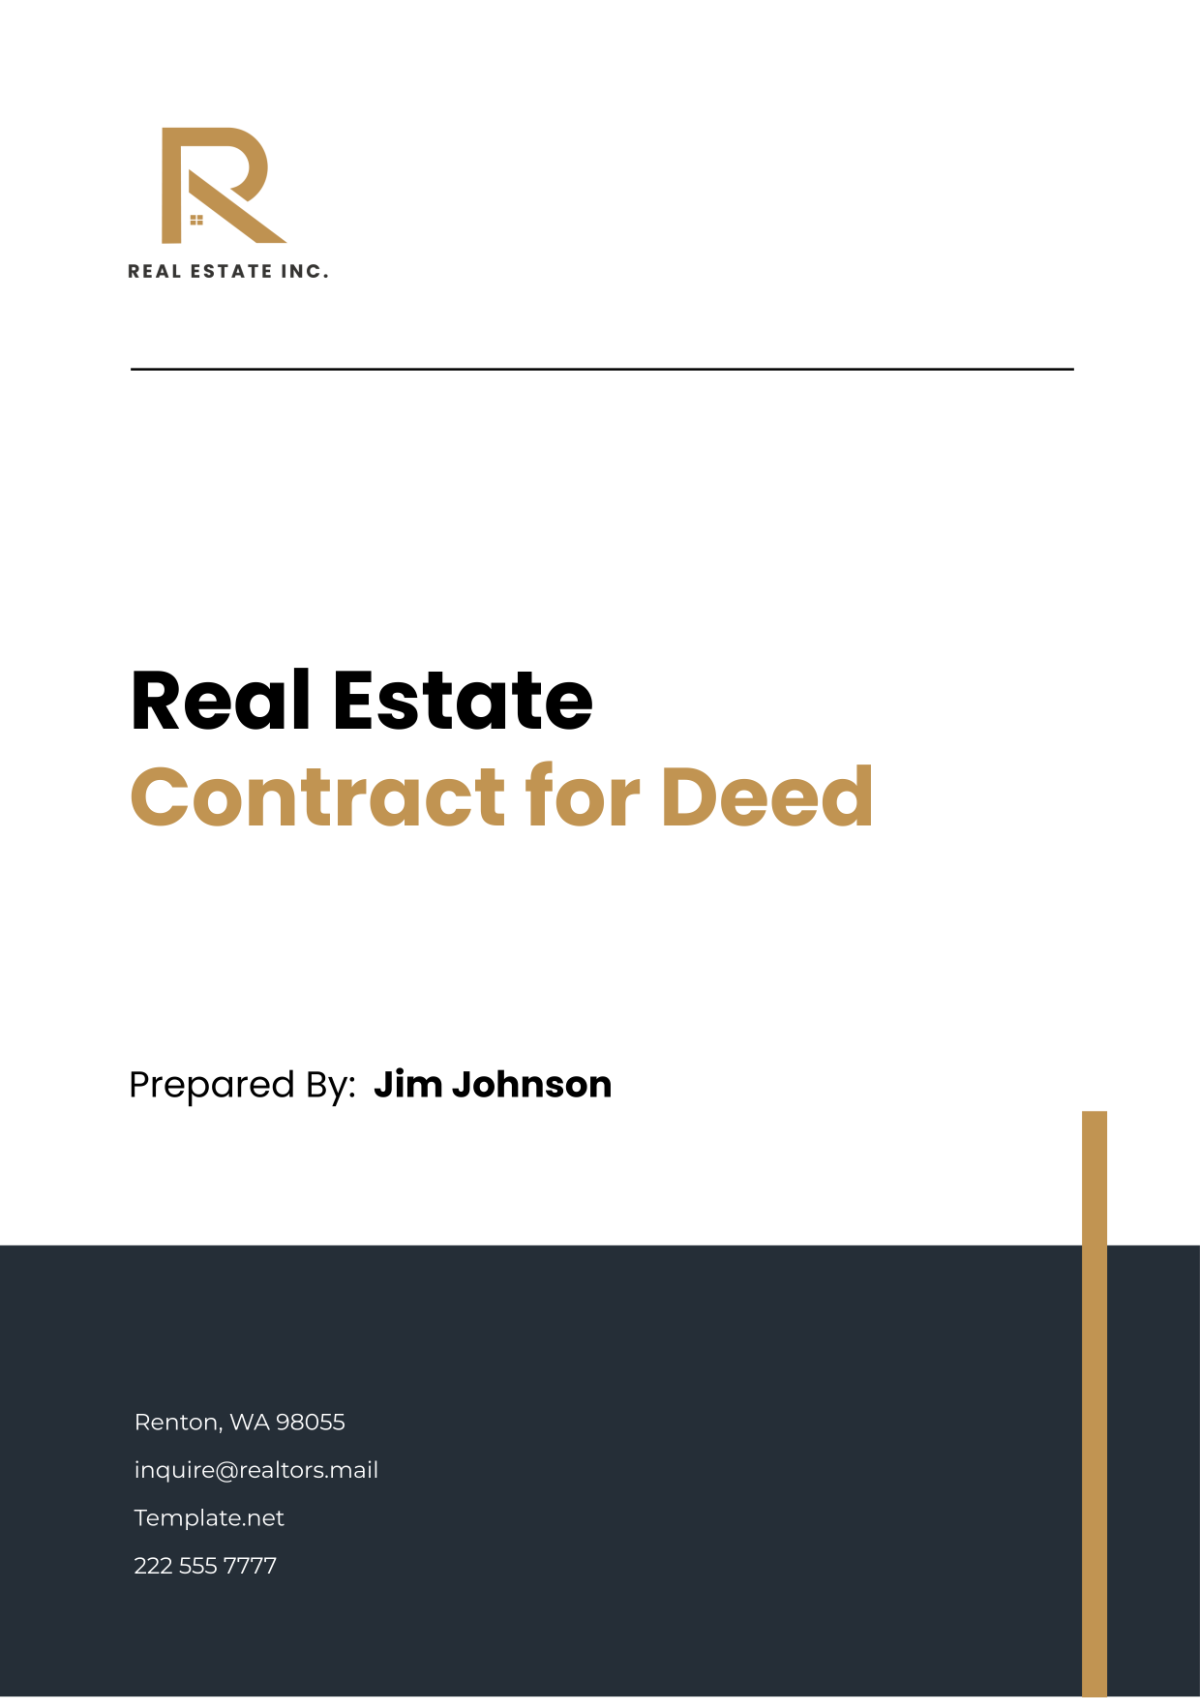 Free Real Estate Contract for Deed Template